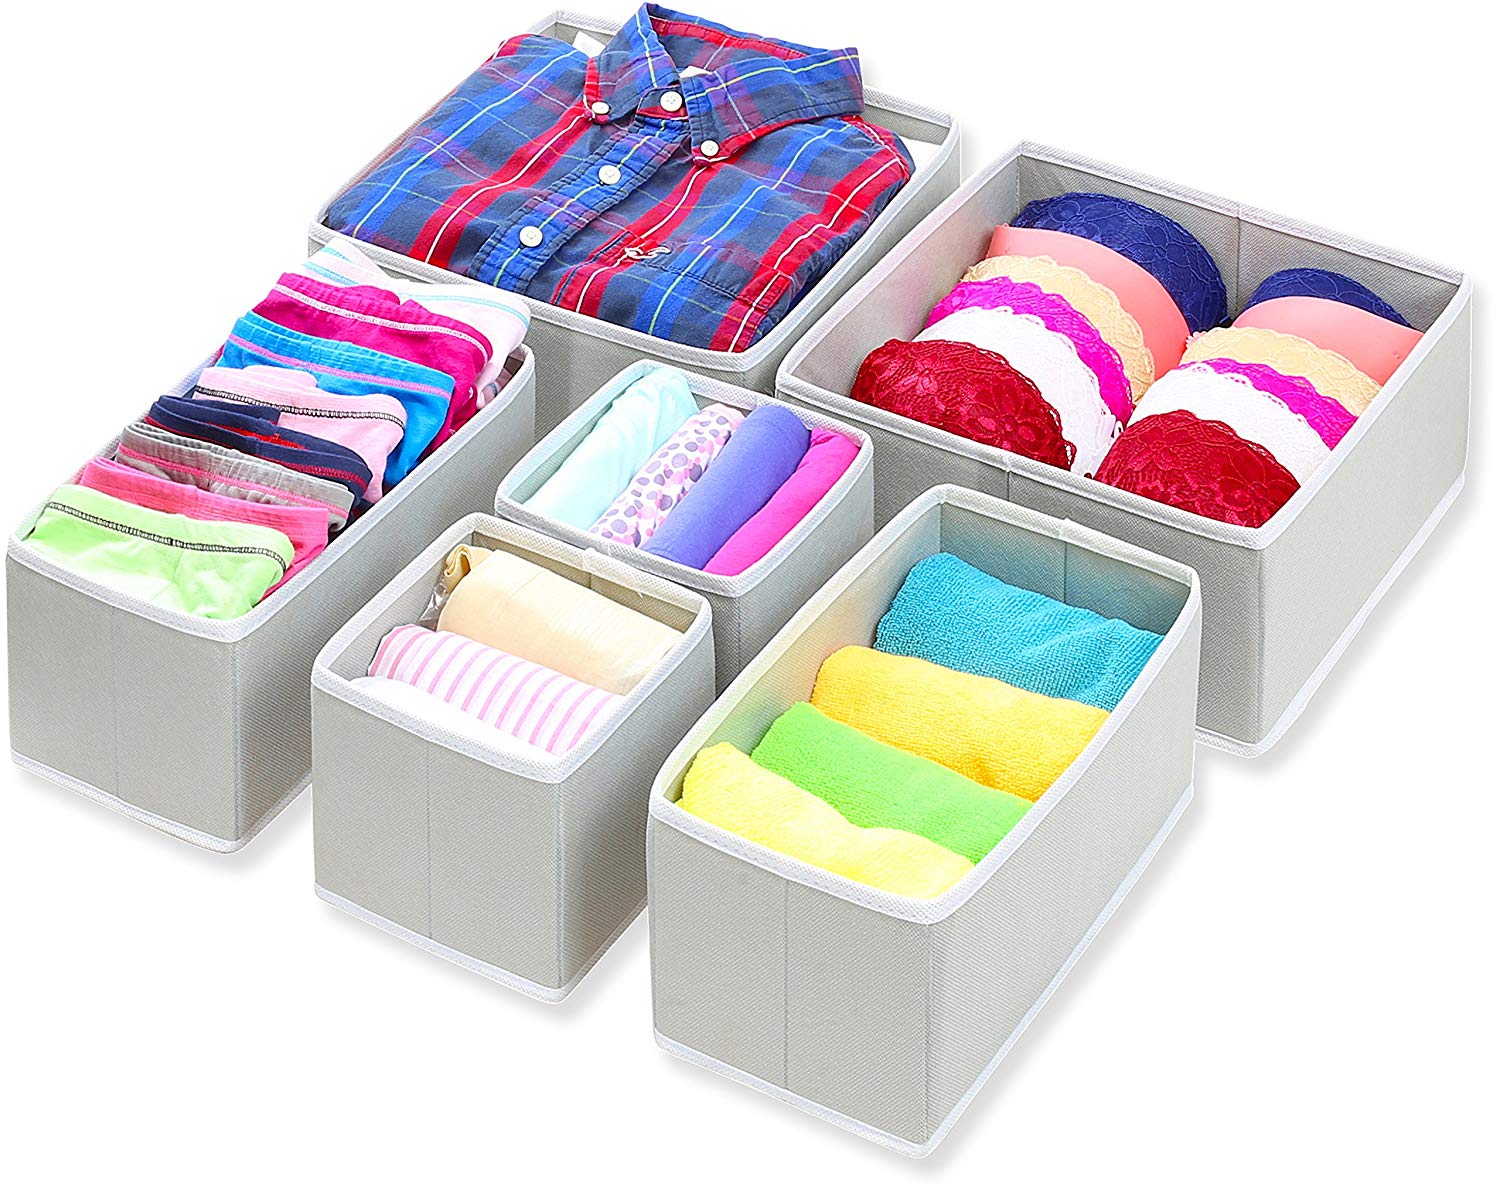 Foldable Cloth Storage Boxes (Set of 6) Only $14.97 Shipped!